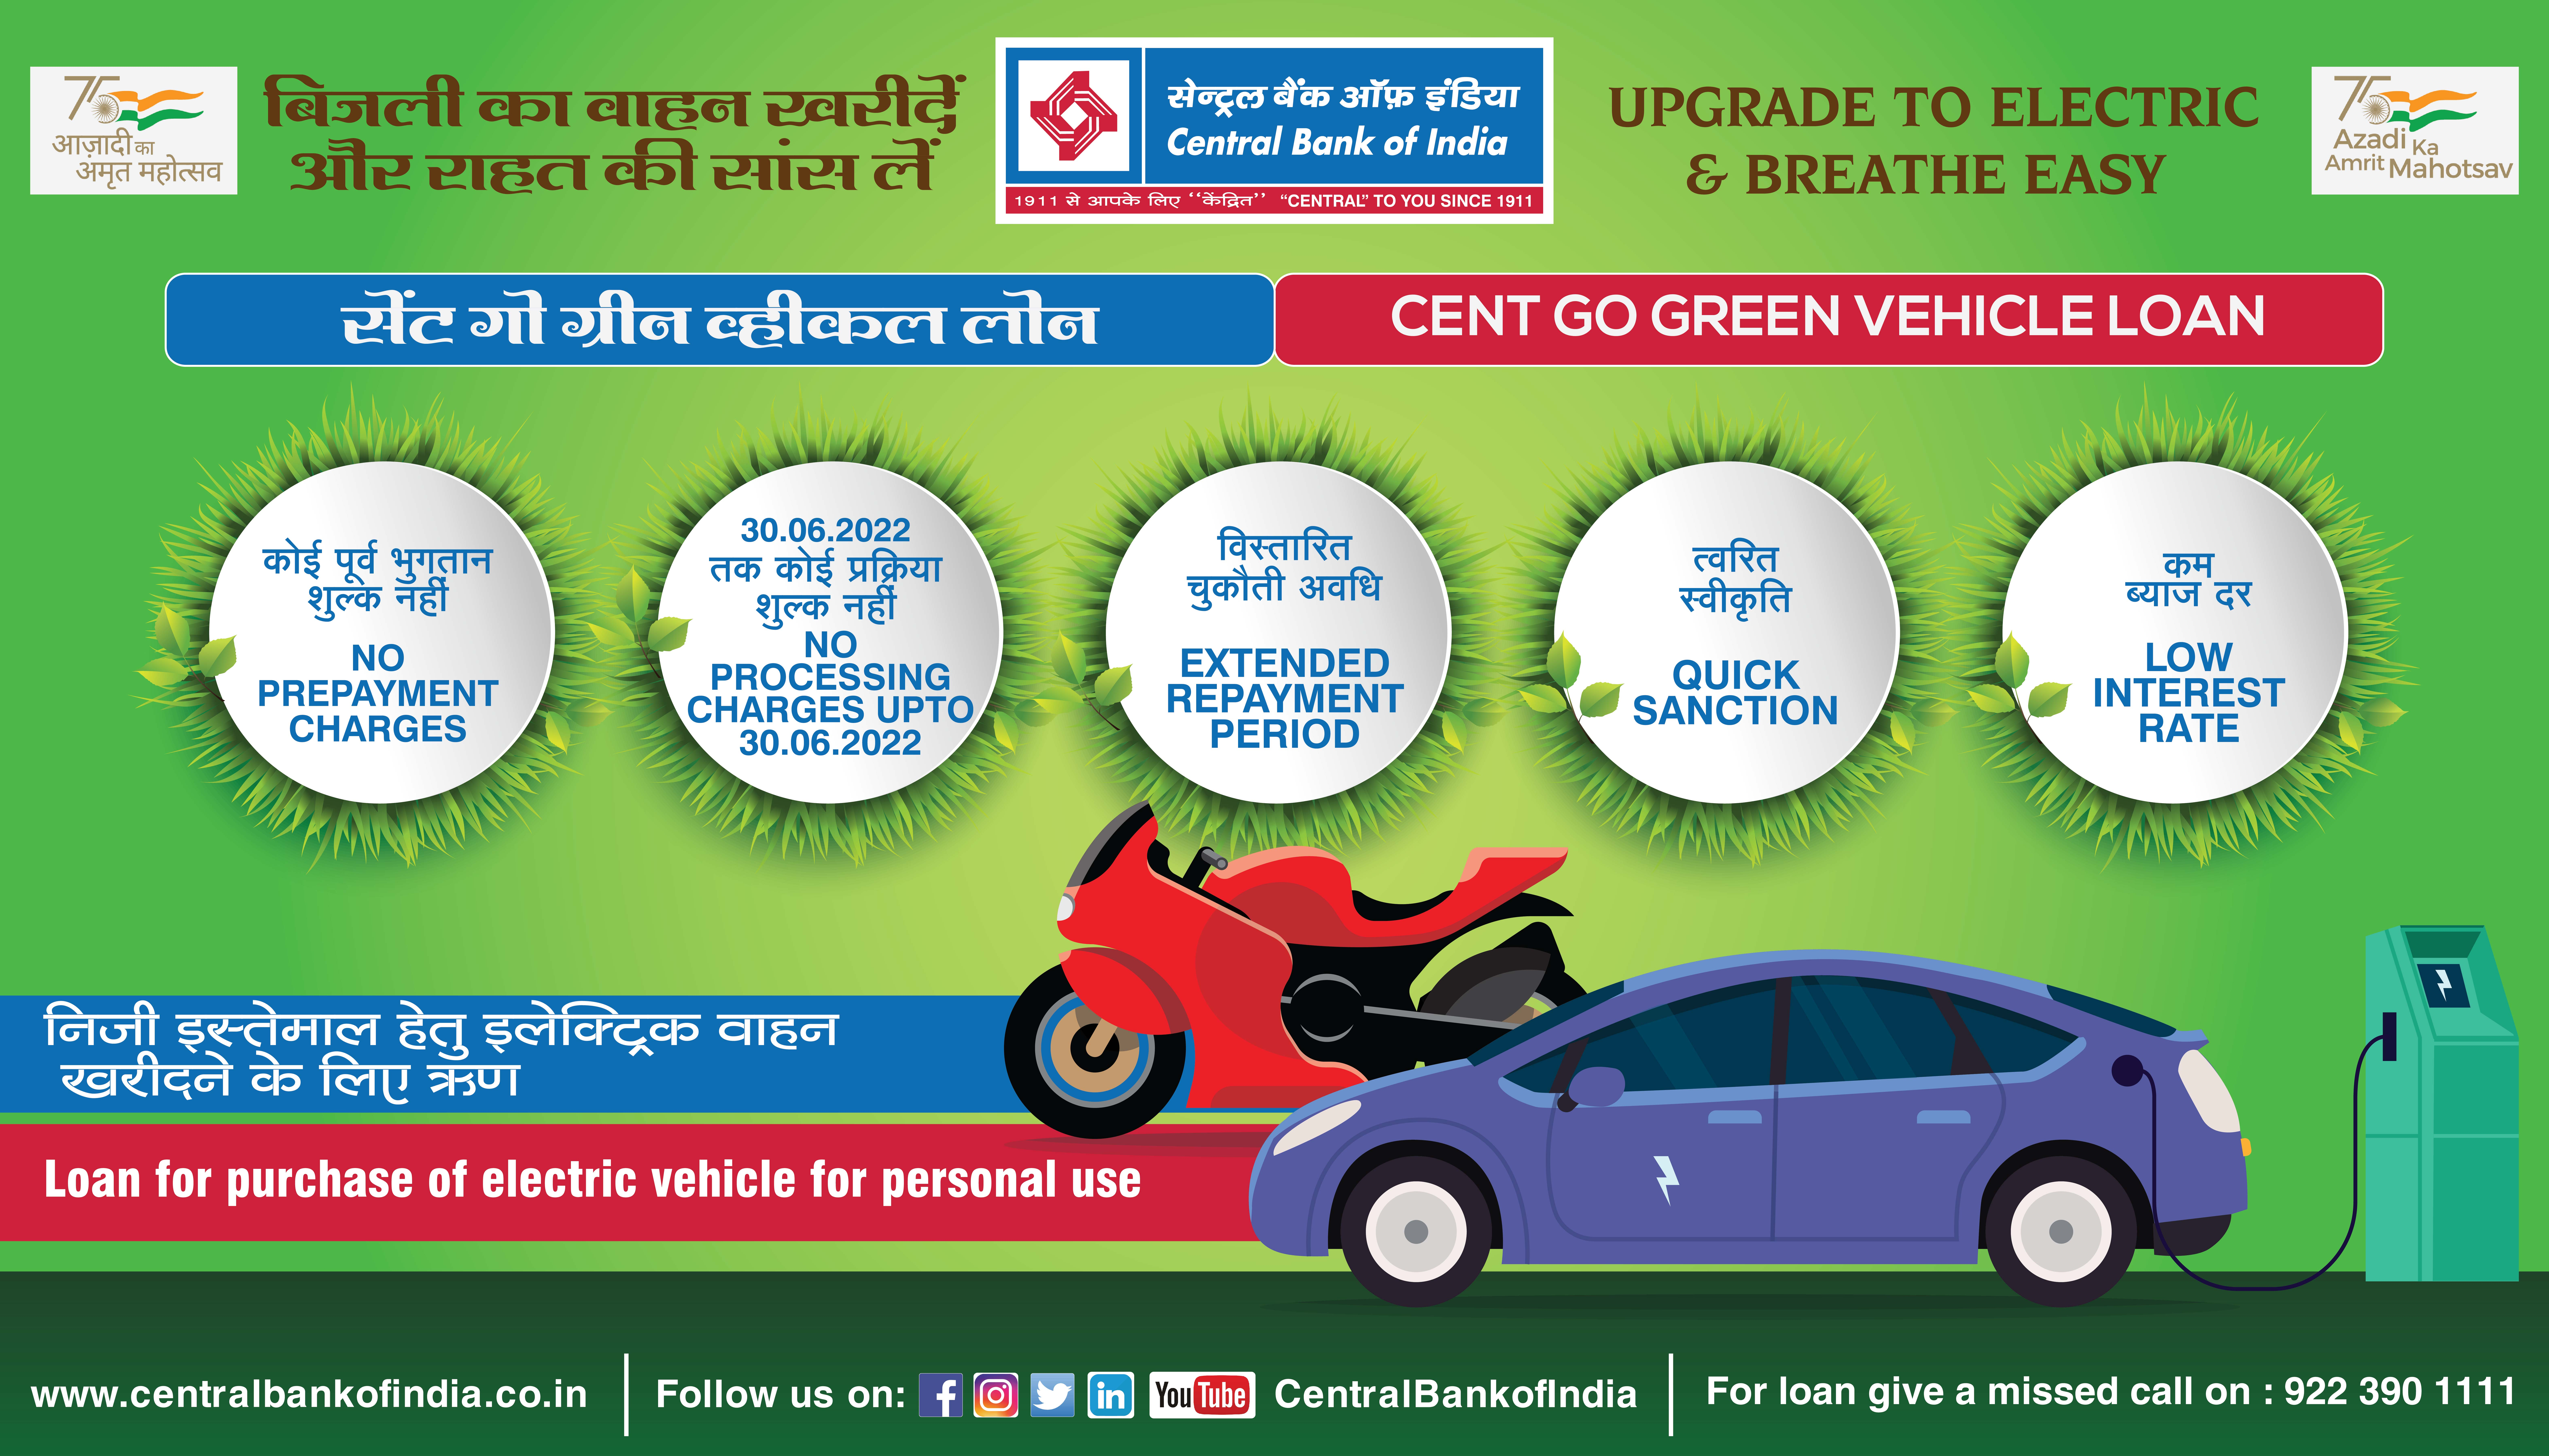 CENT_GO_GREEN_VEHICLE_LOAN